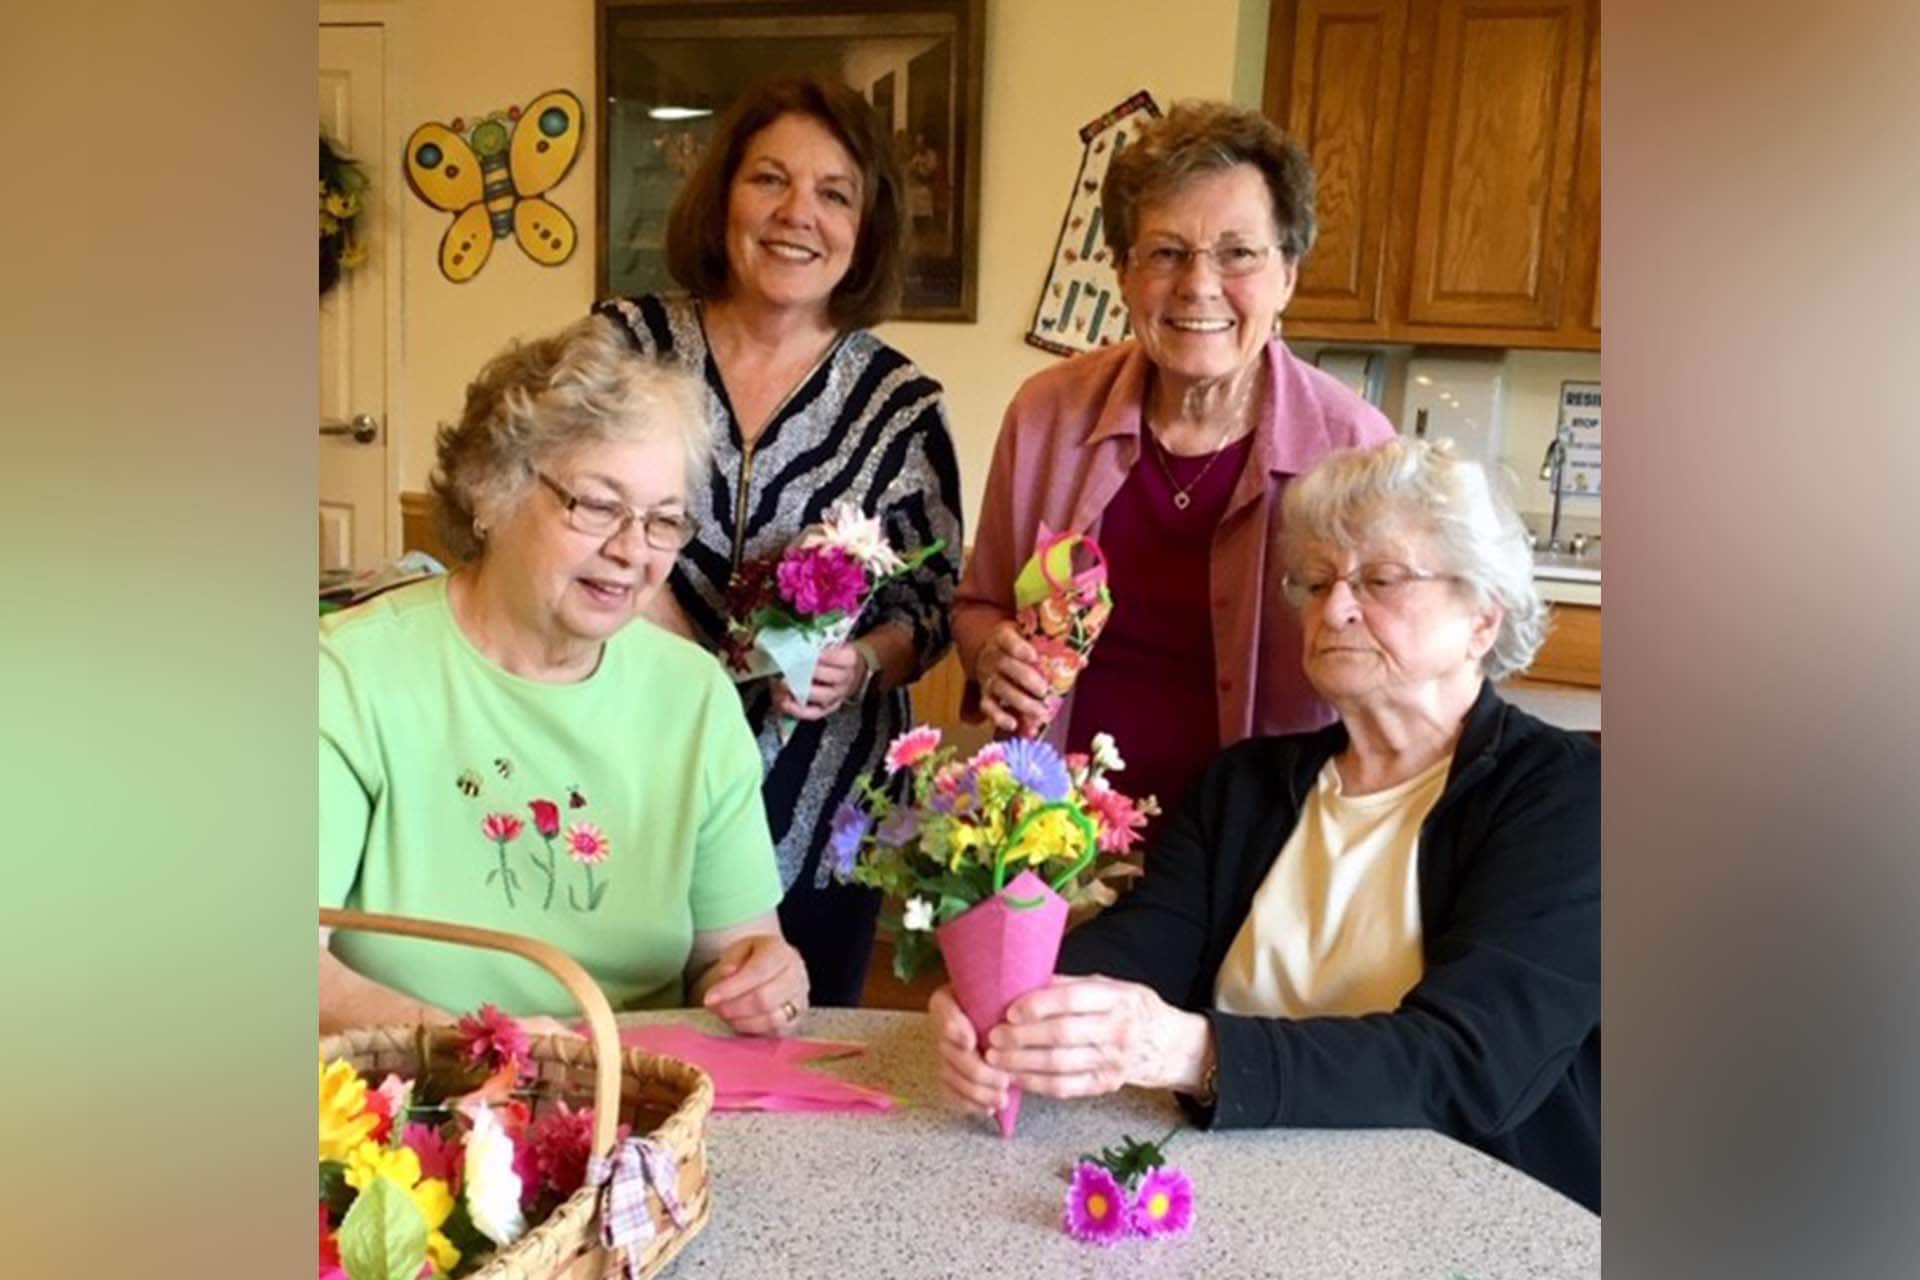 From left to right: Linda DeBarr, Jane Godwin, Vonnie Hager, and Wilda Godwin